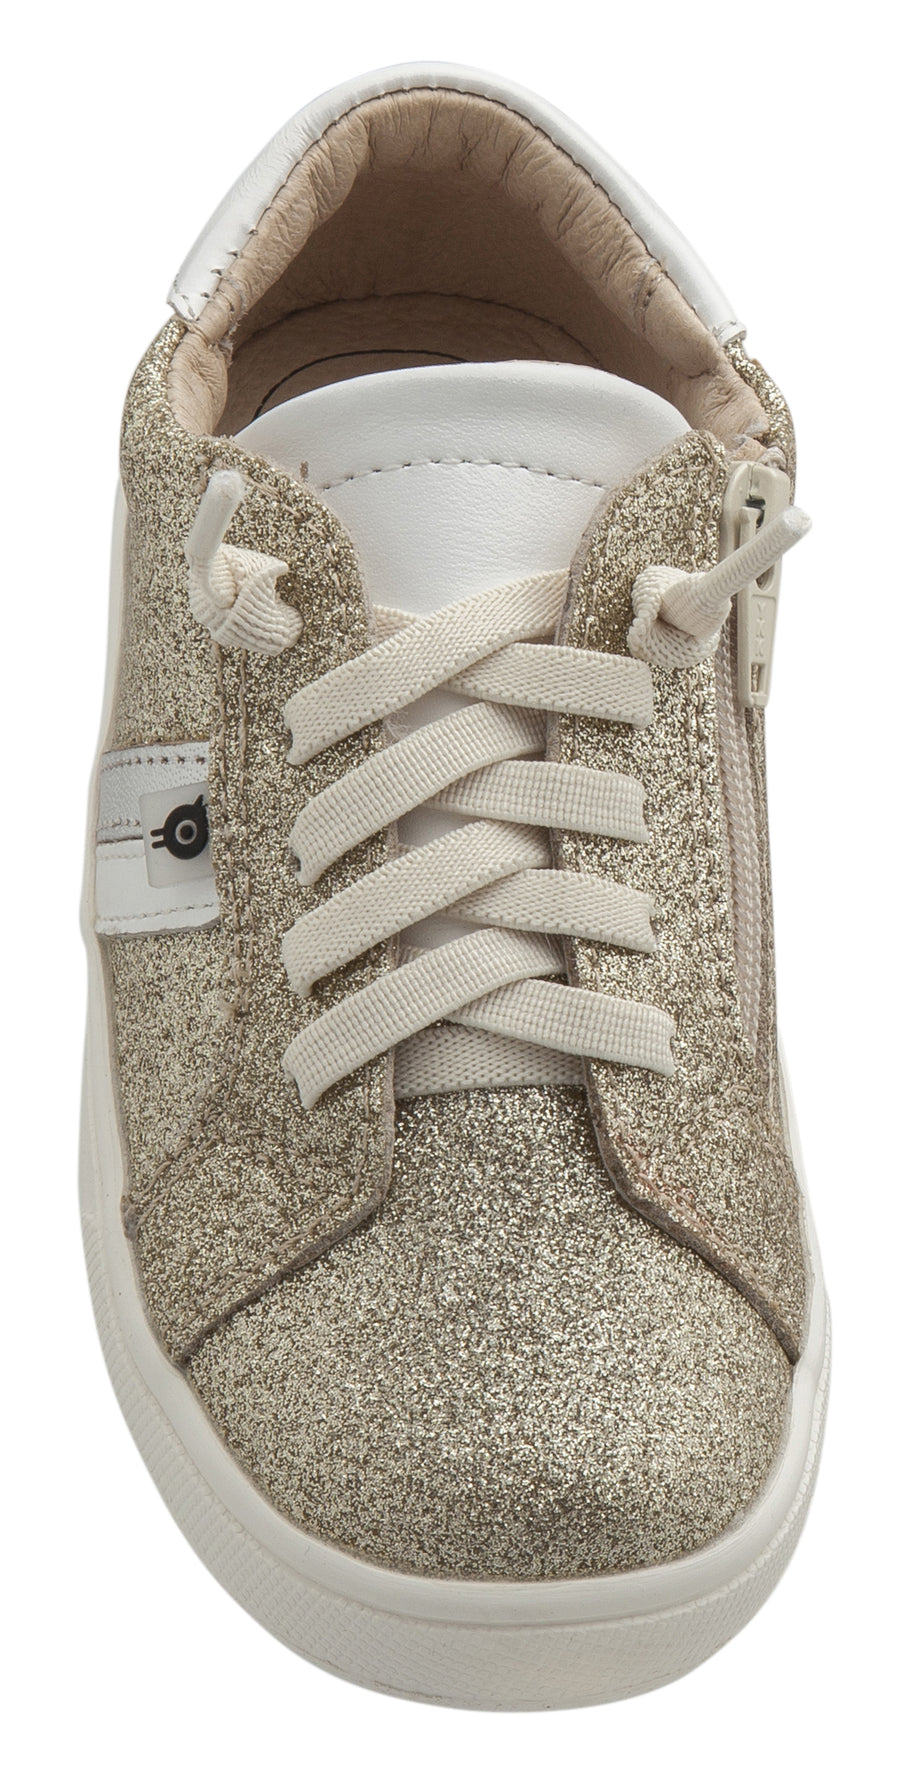 Old Soles Girl's Glambo Leather Sneakers, Glam Gold/Snow/Silver/Gold